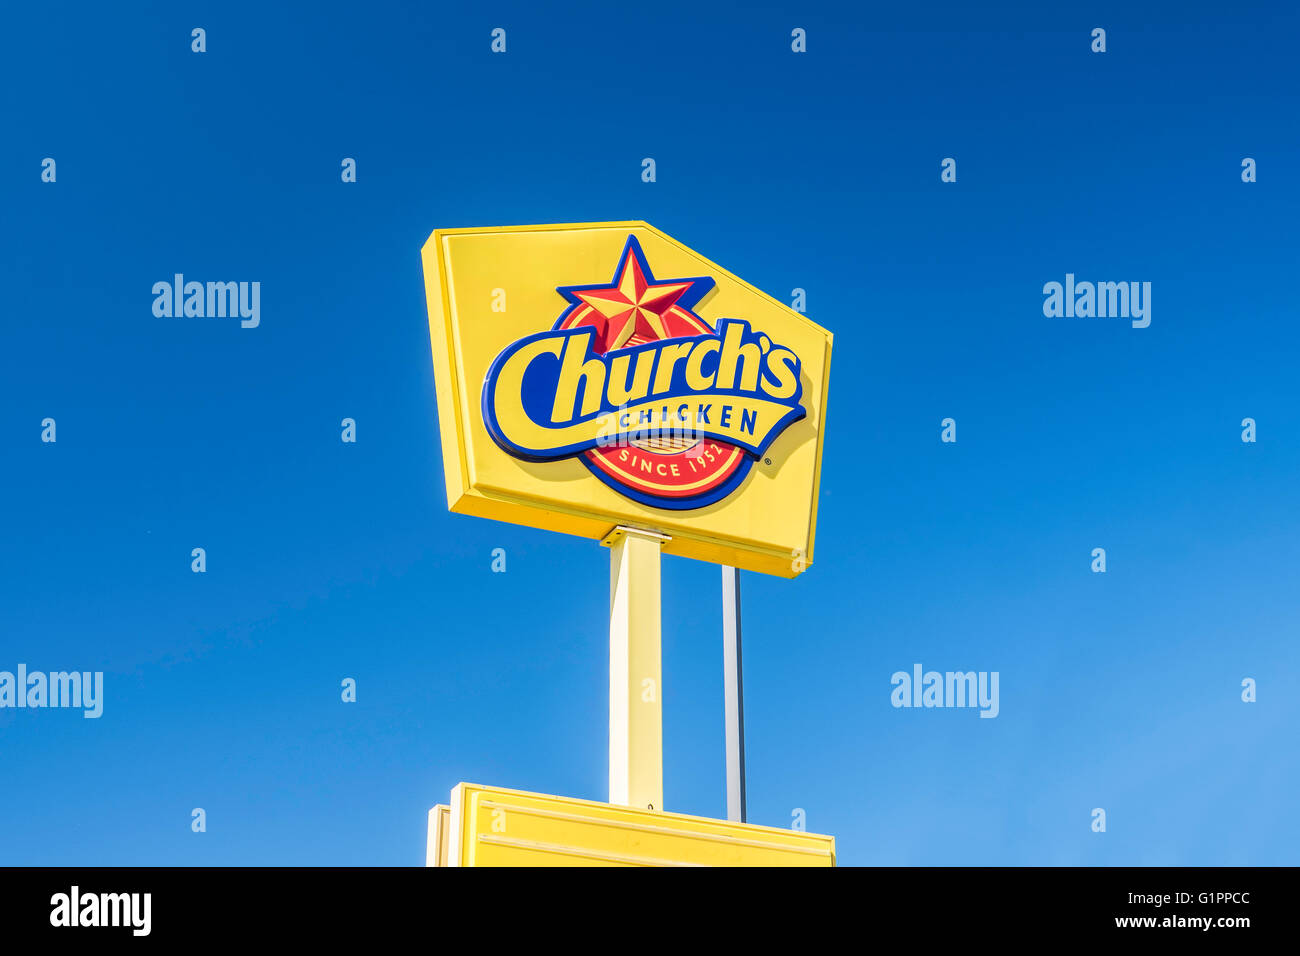 A pole sign advertising Church's Chicken, a fast food eatery in Oklahoma City, Oklahoma, USA. Stock Photo